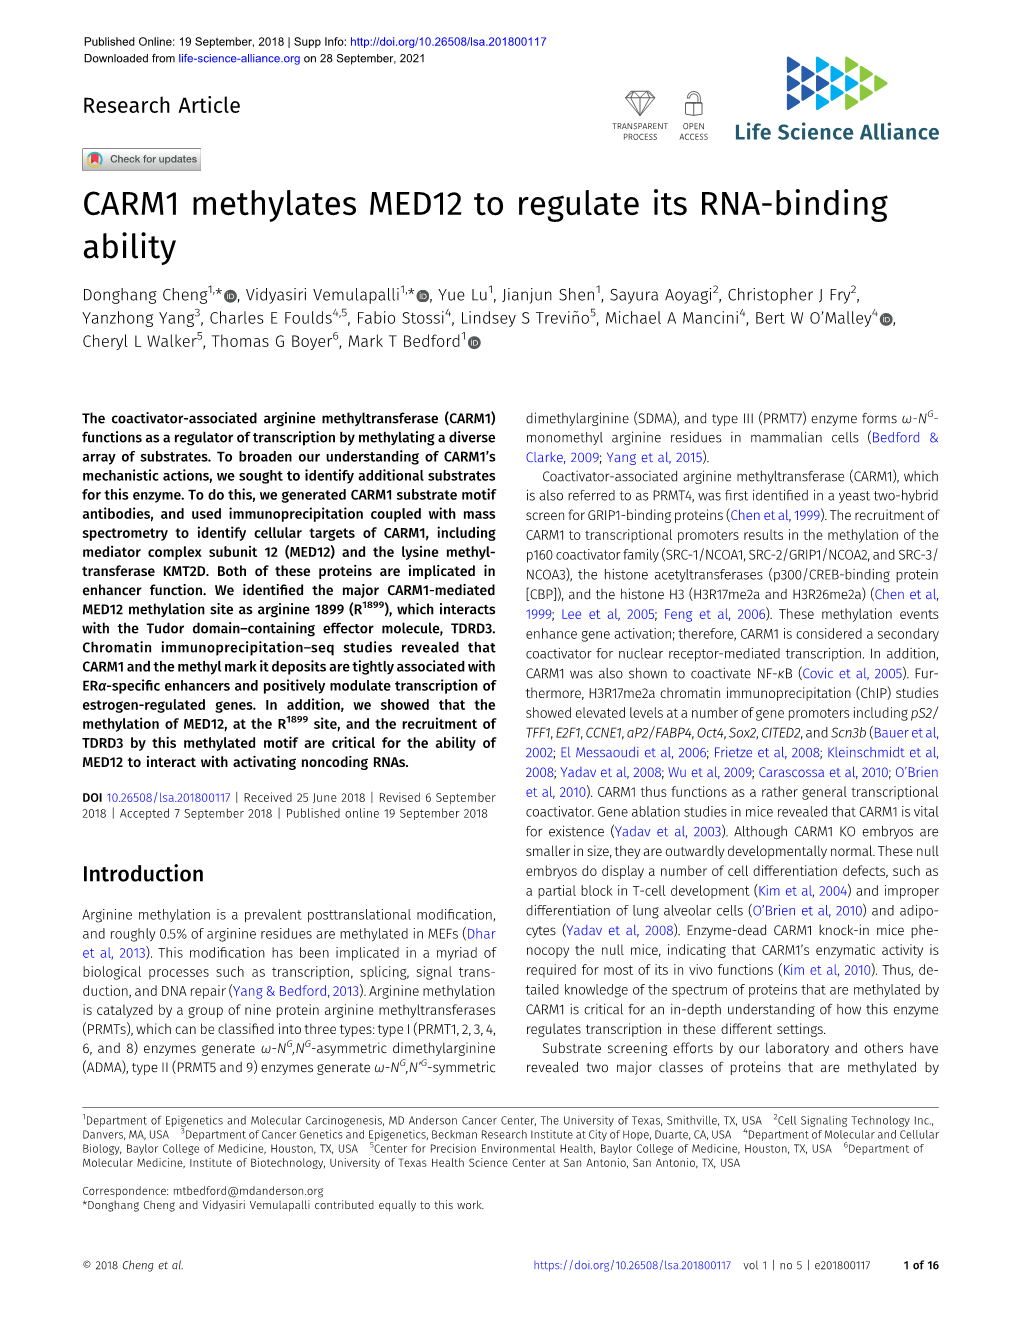 CARM1 Methylates MED12 to Regulate Its RNA-Binding Ability